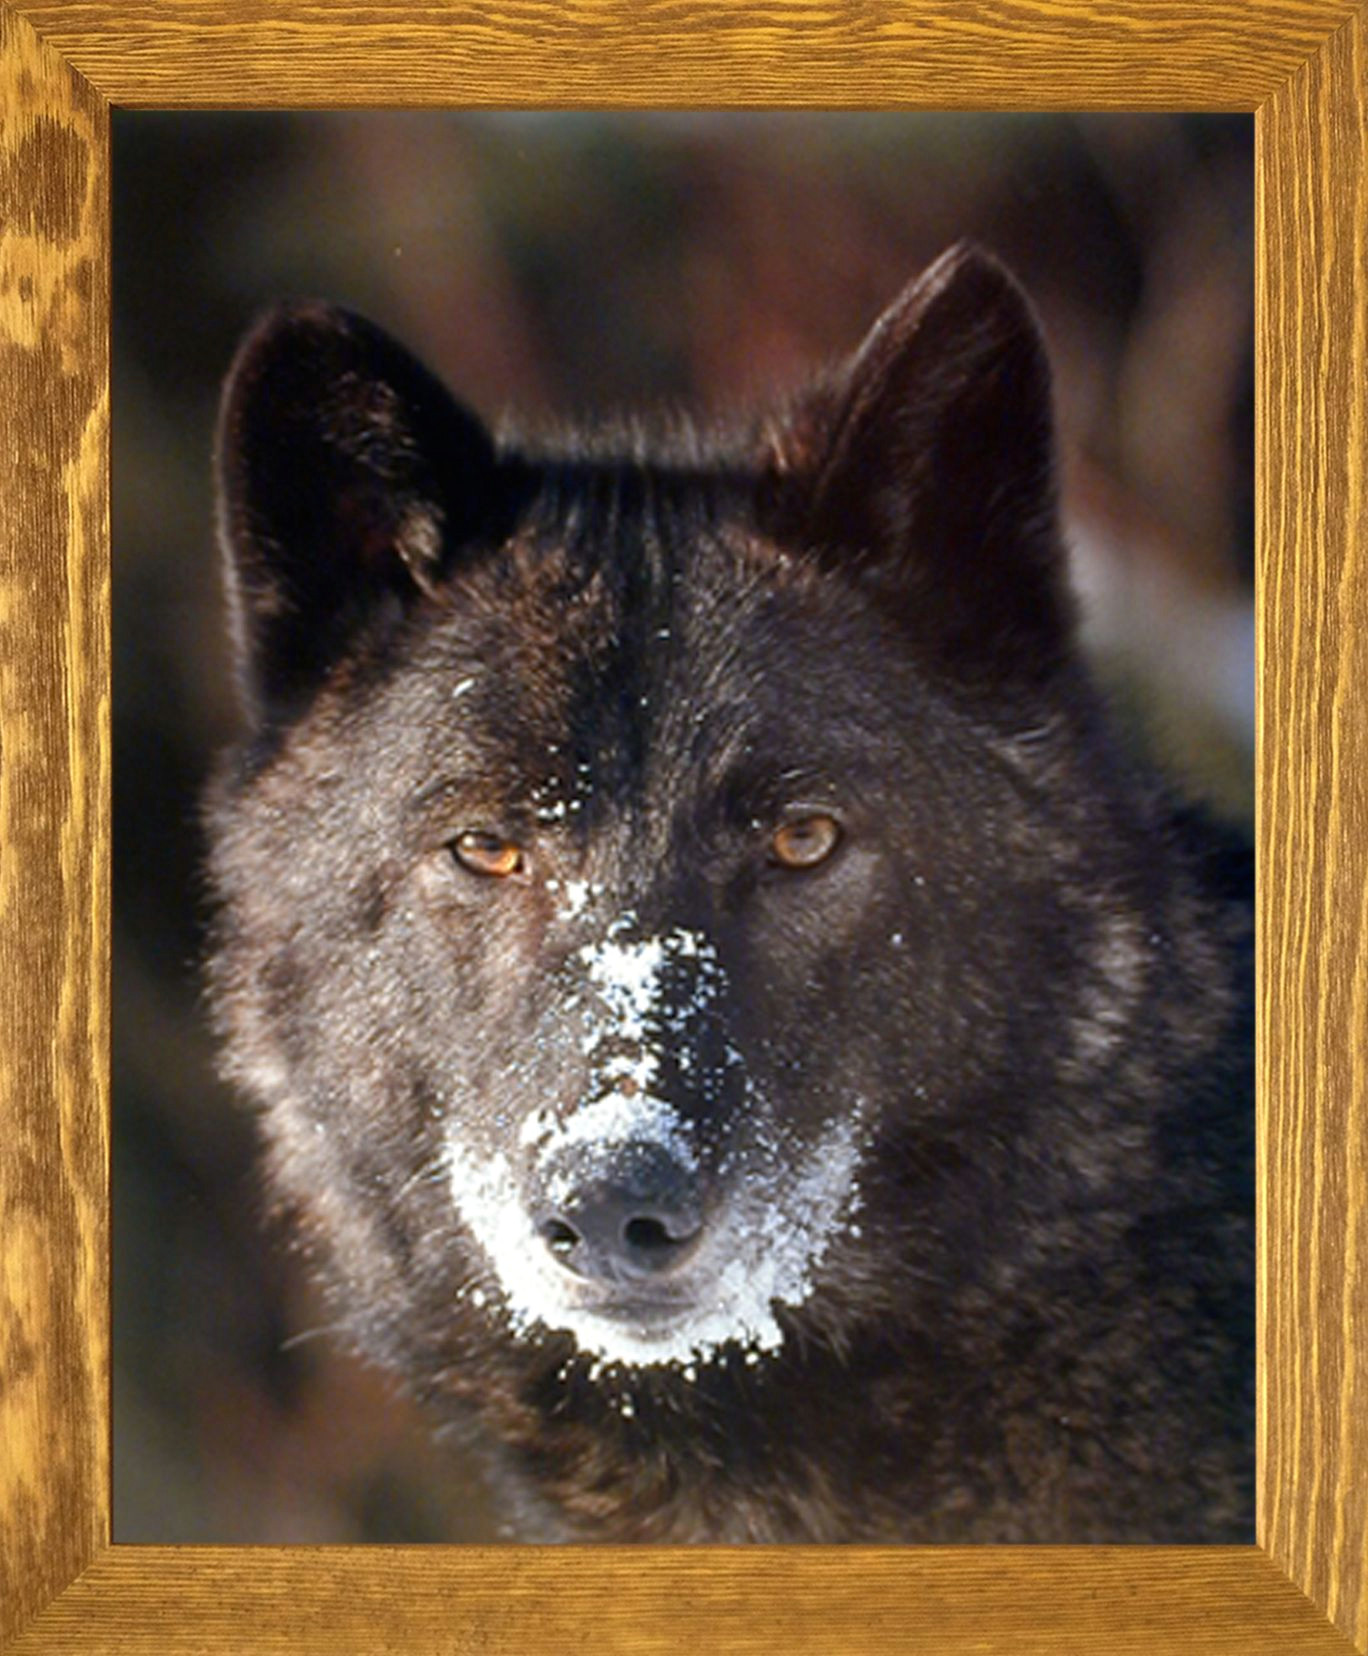 Drawing Of A Black Wolf Add This Black Wolf Wild Animal Art Print Framed Poster In Your Home